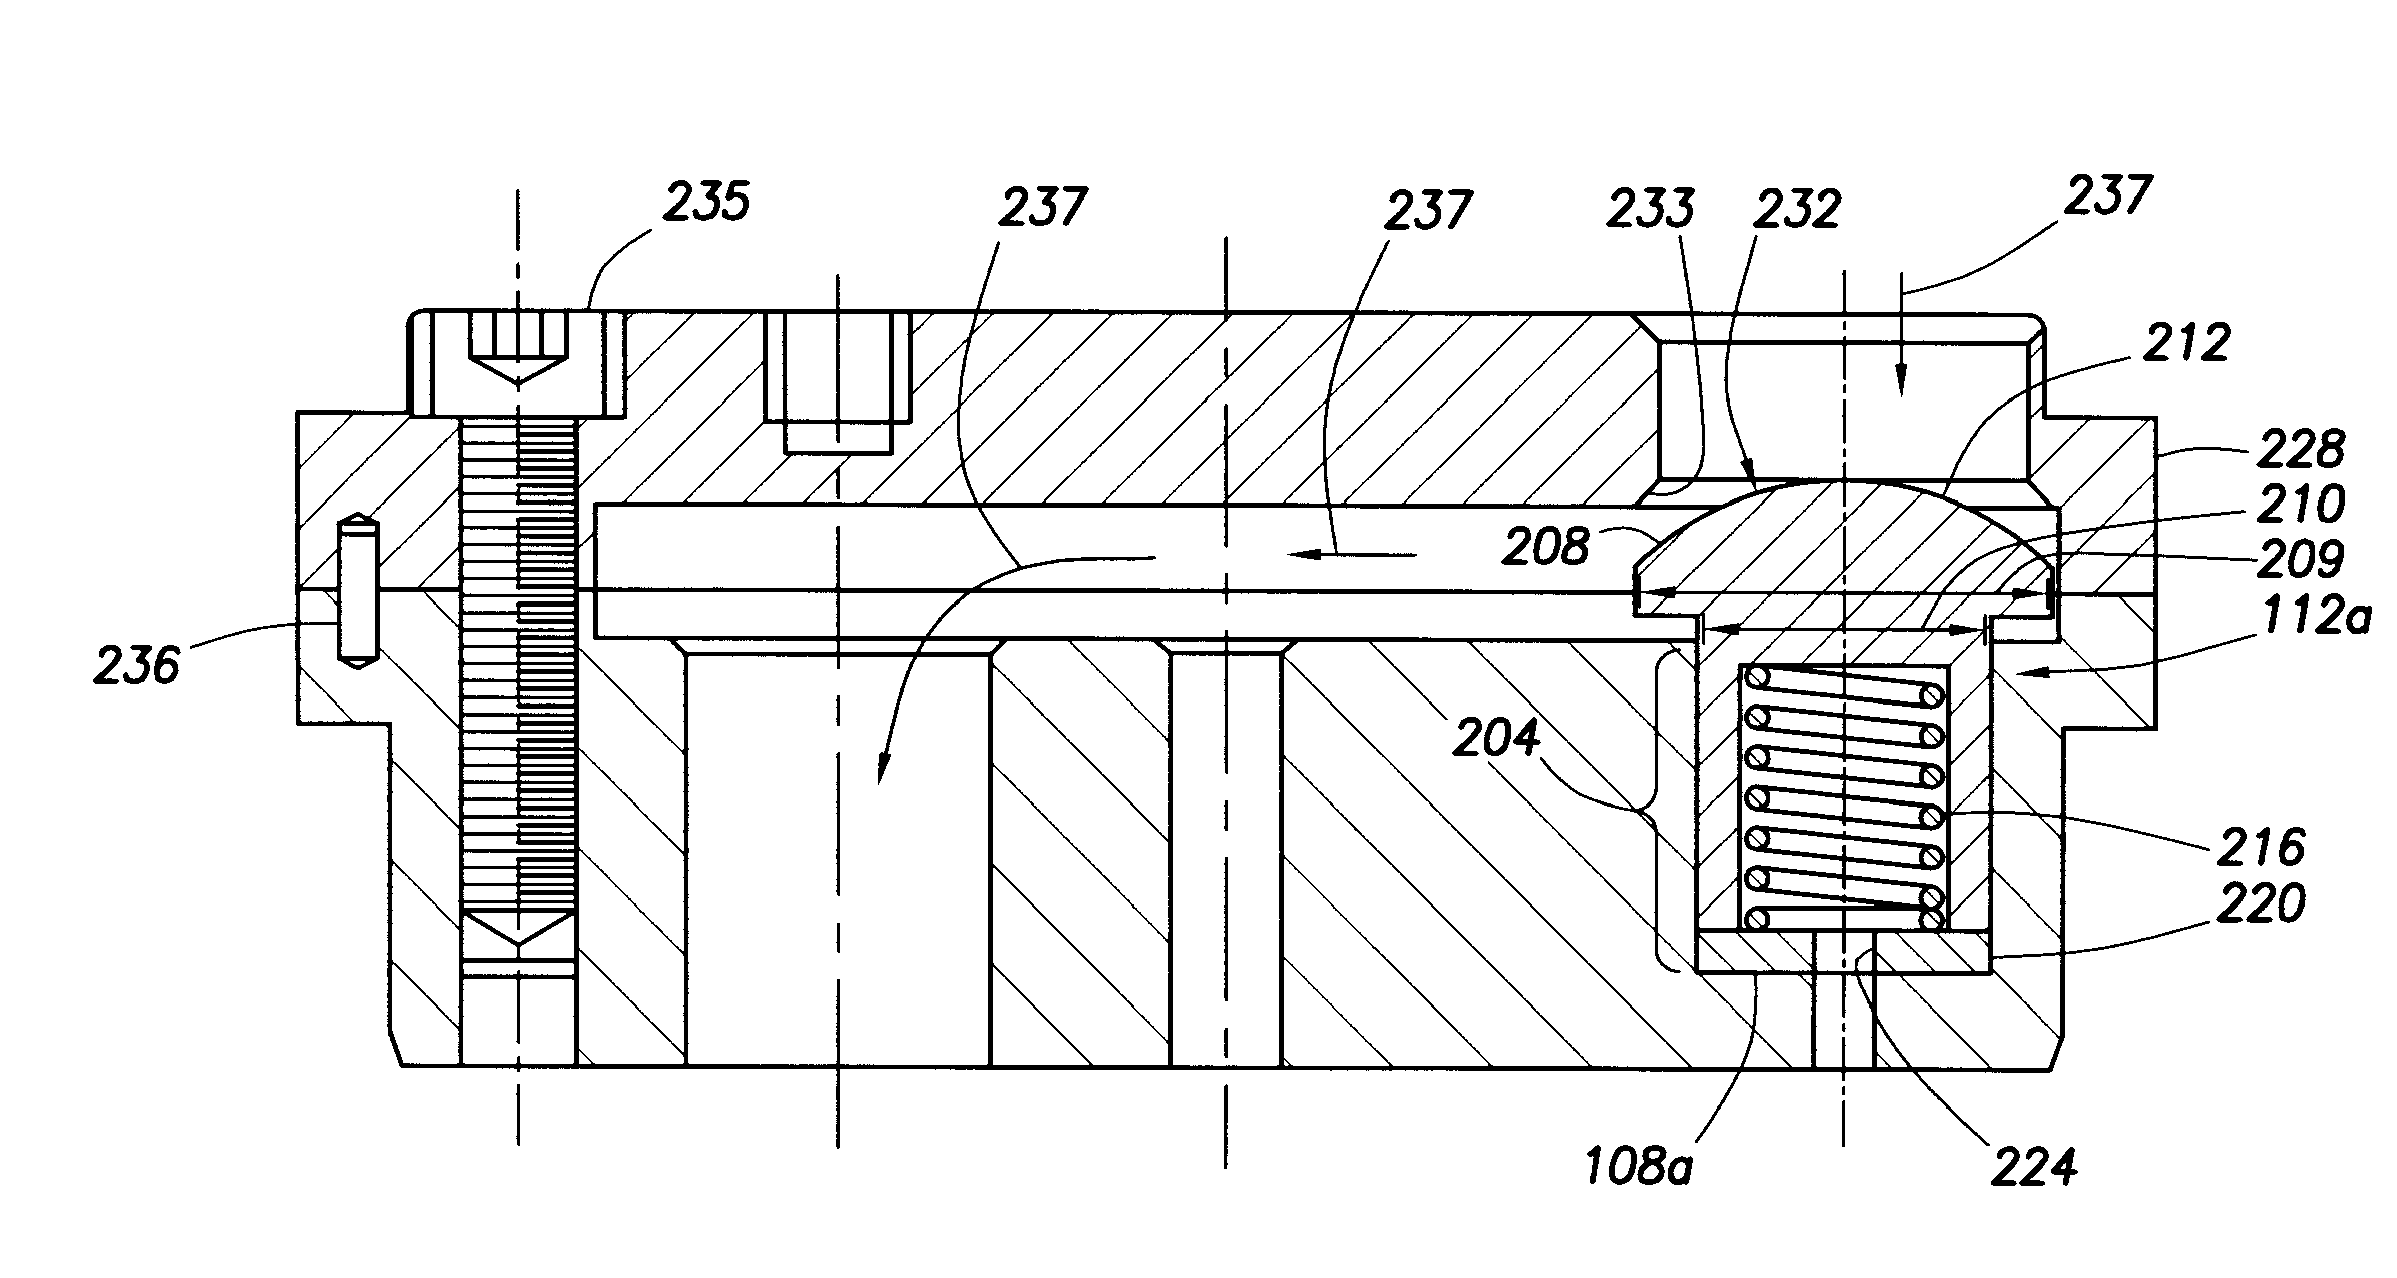 Poppet valve assembly, system, and apparatus for use in high speed compressor applications